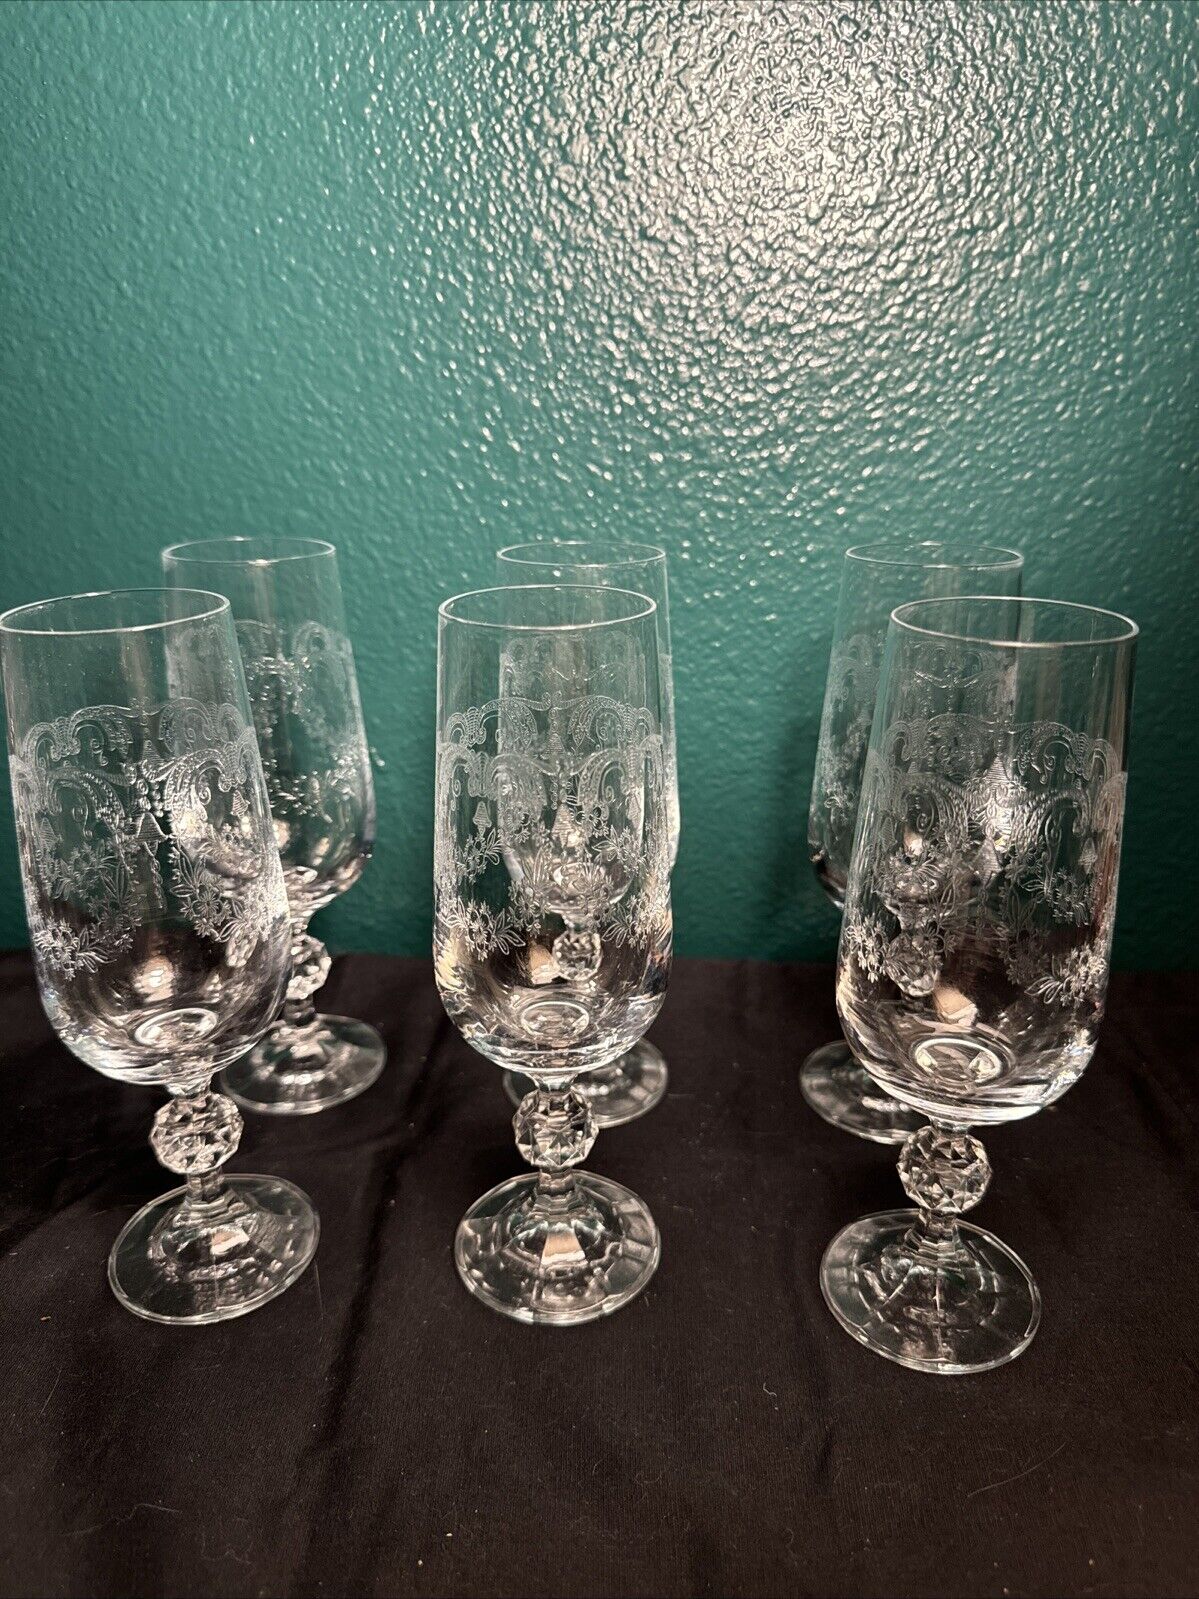 6 VINTAGE CZECH BOHEMIAN CASCADE ETCHED BLOWN CRYSTAL CHAMPAGNE FLUTE WINE GLASS